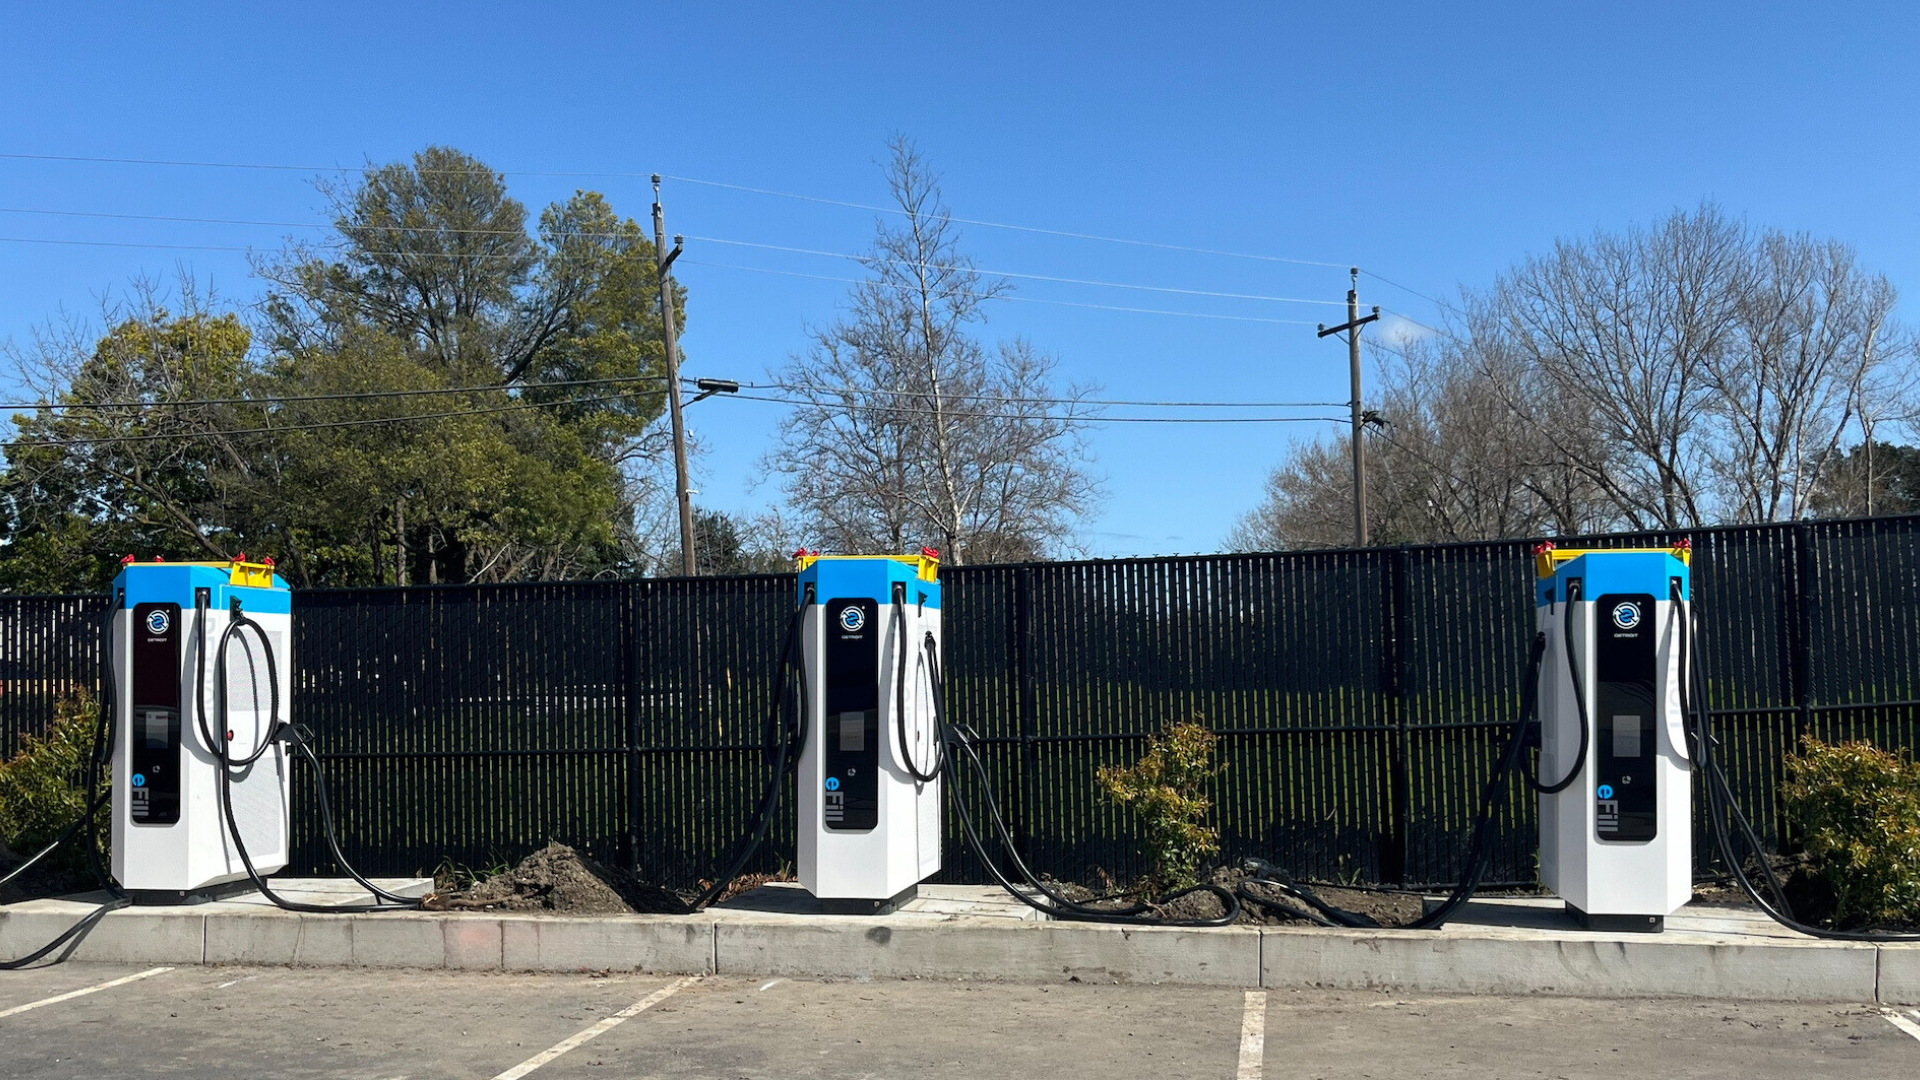 Electric vehicle charging stations in a parking lot